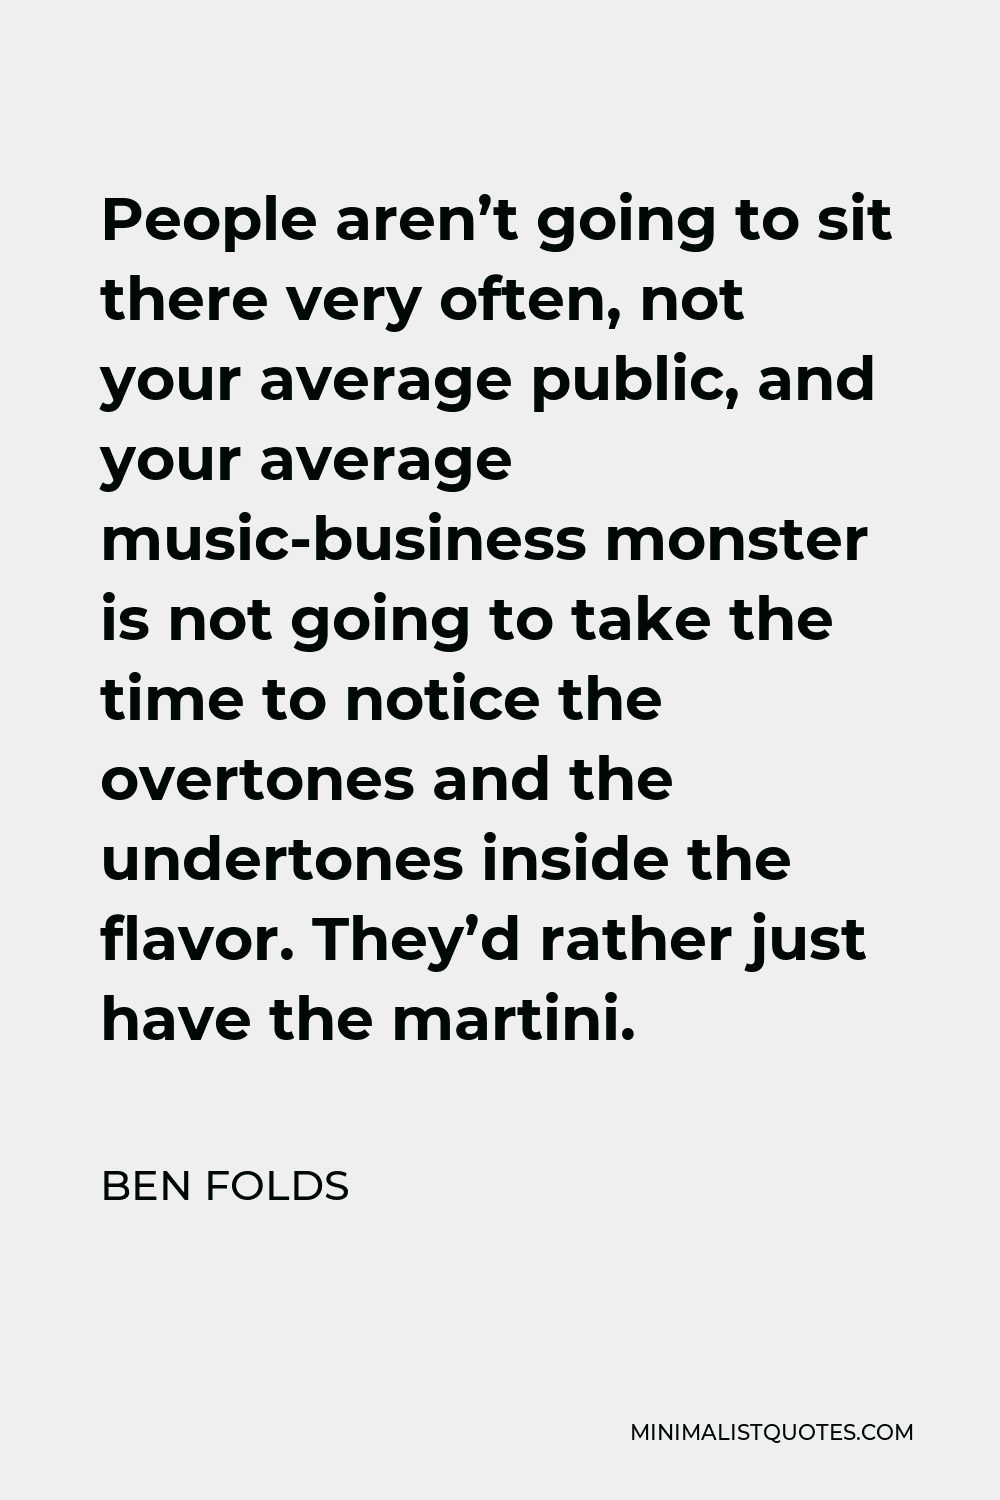 Ben Folds Quote - People aren’t going to sit there very often, not your average public, and your average music-business monster is not going to take the time to notice the overtones and the undertones inside the flavor. They’d rather just have the martini.